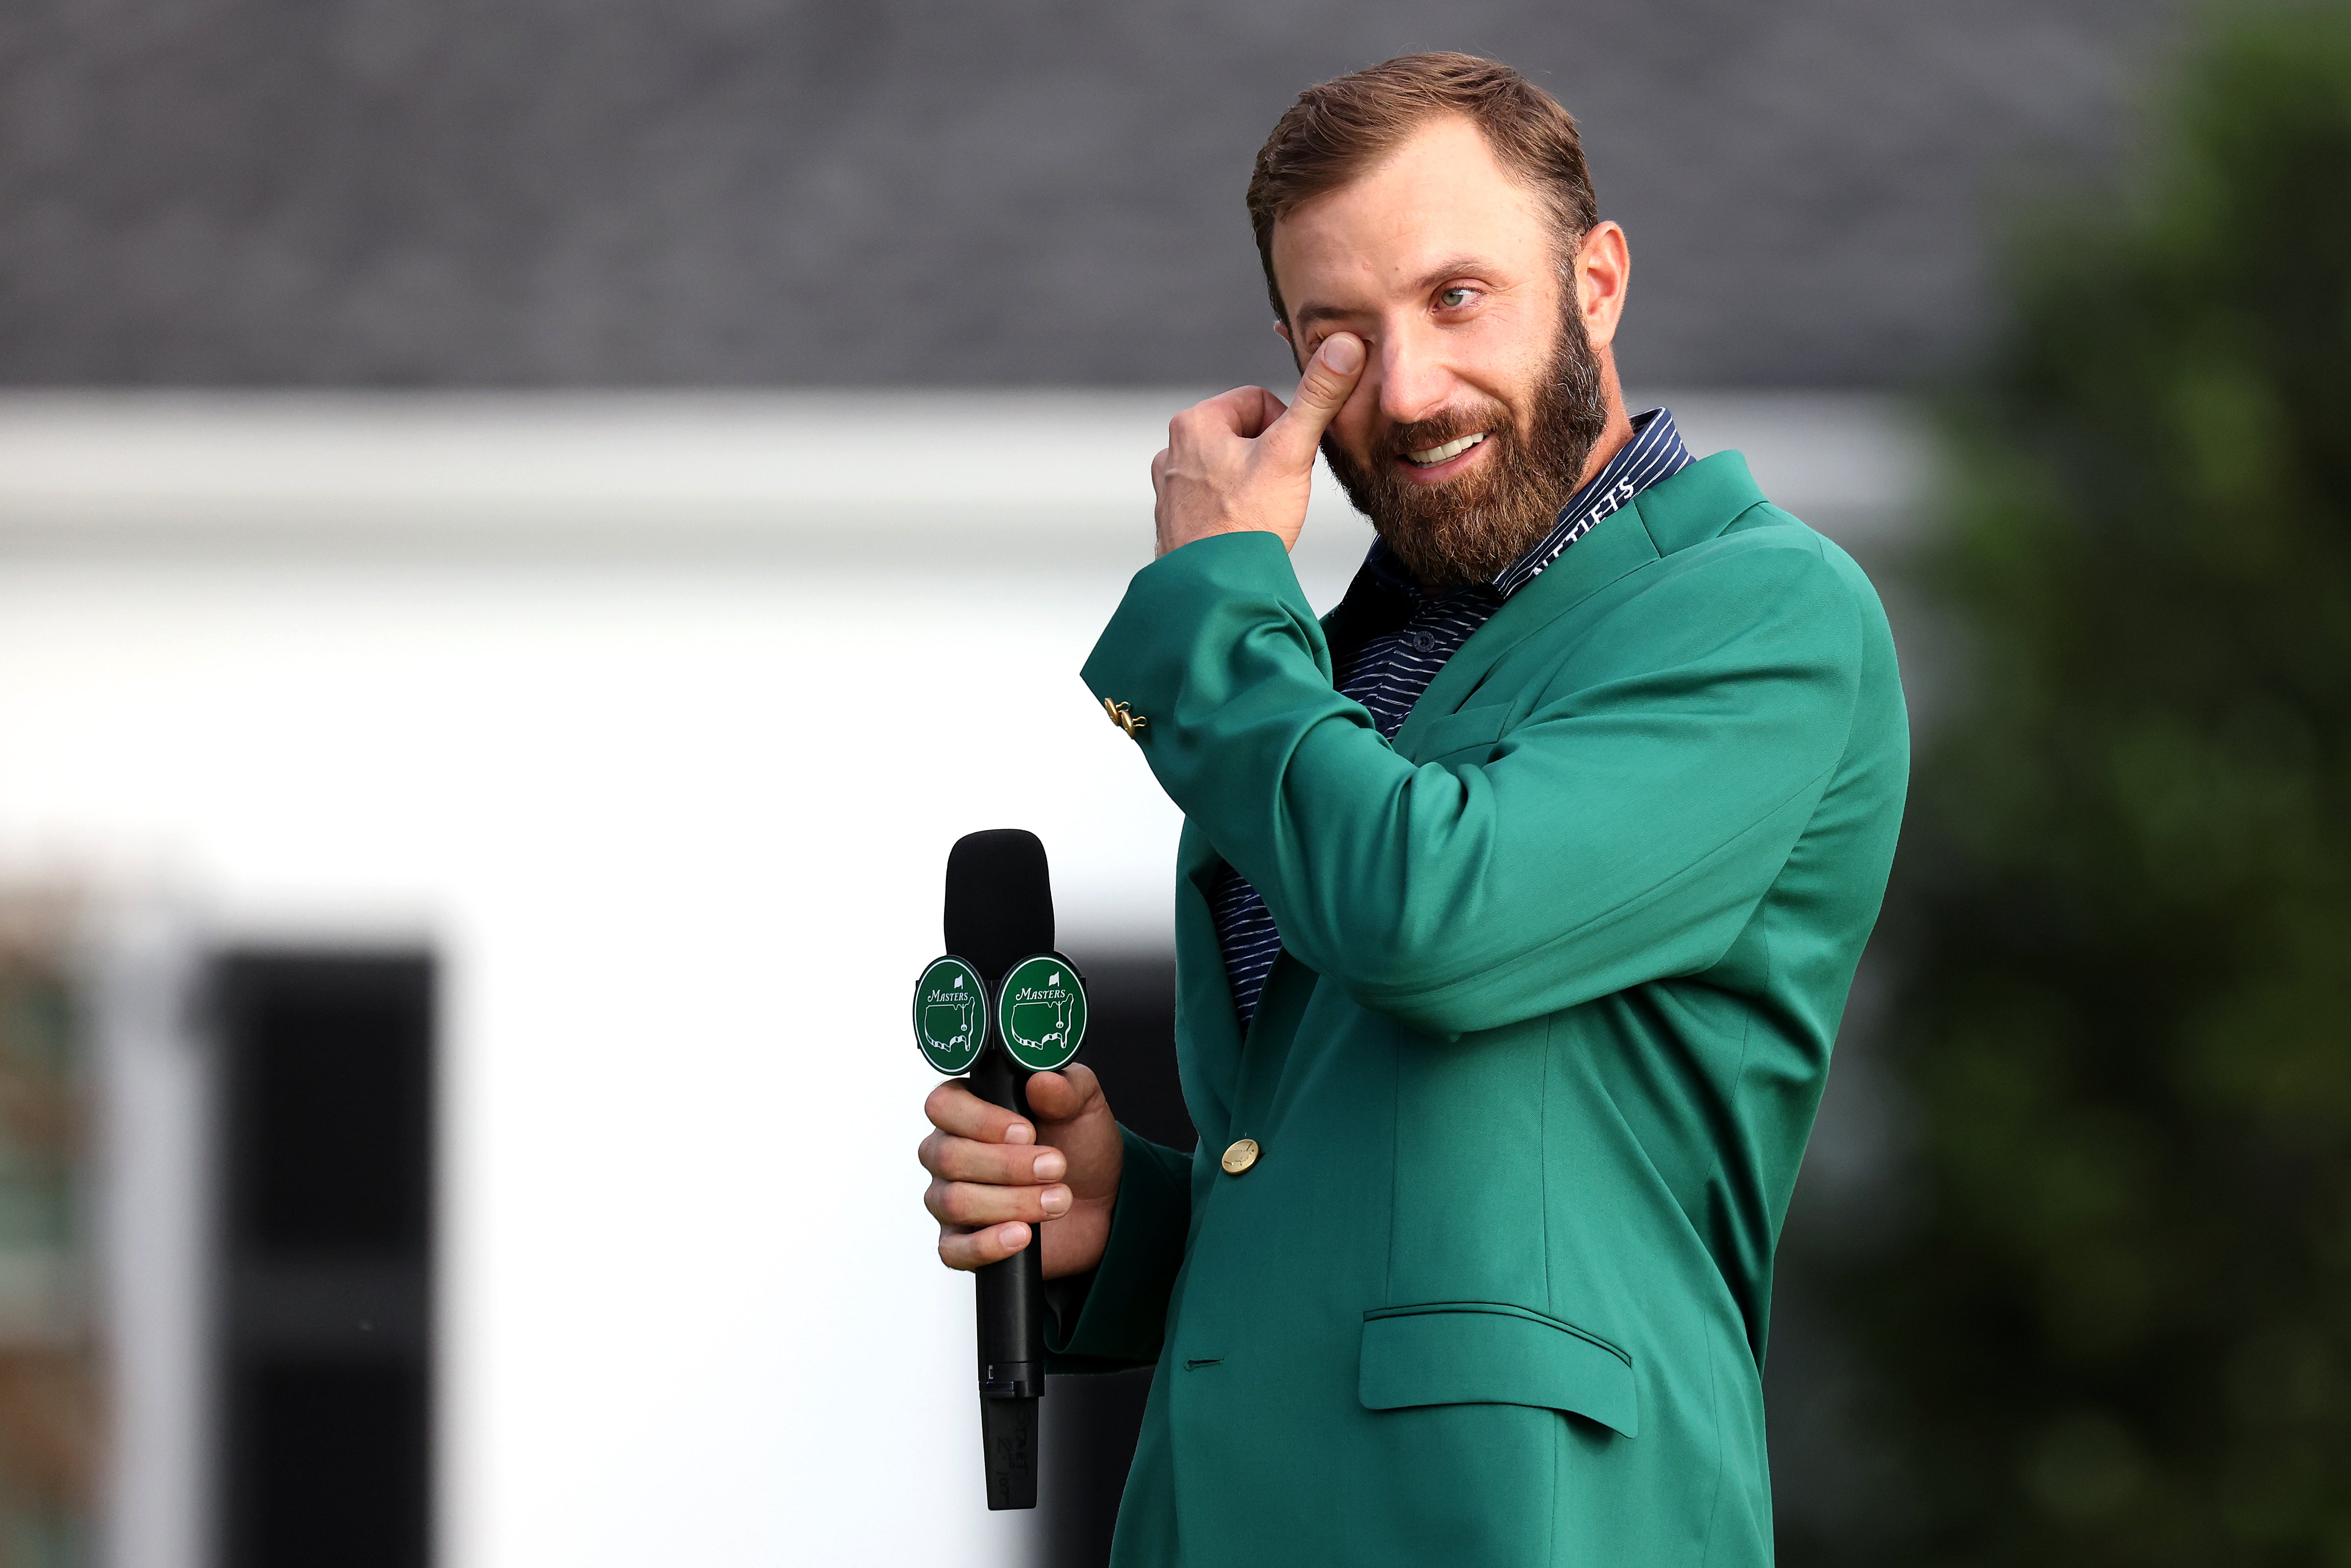 An emotional Dustin Johnson after winning the Masters by five strokes in November